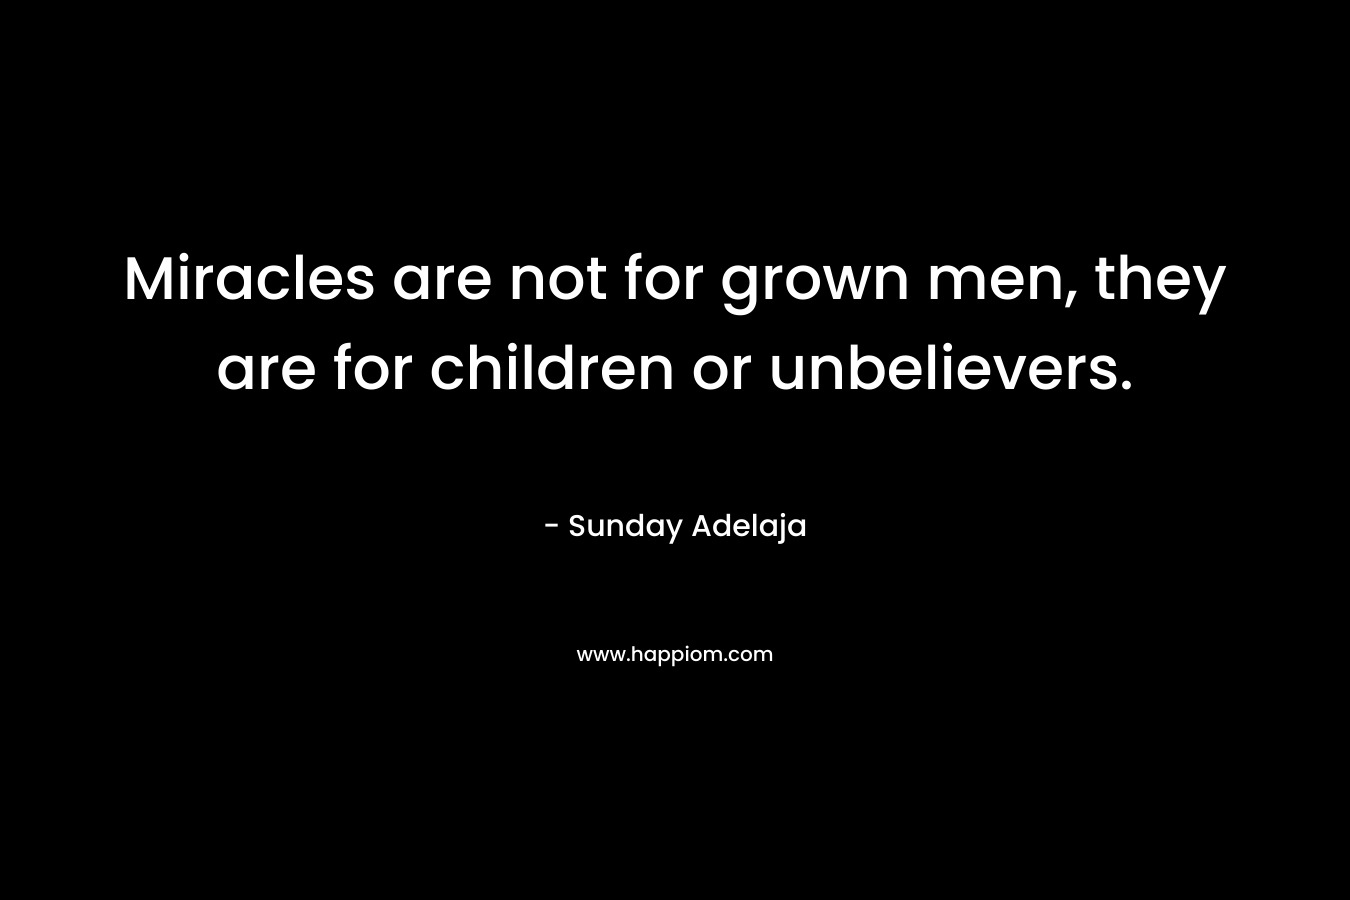 Miracles are not for grown men, they are for children or unbelievers.